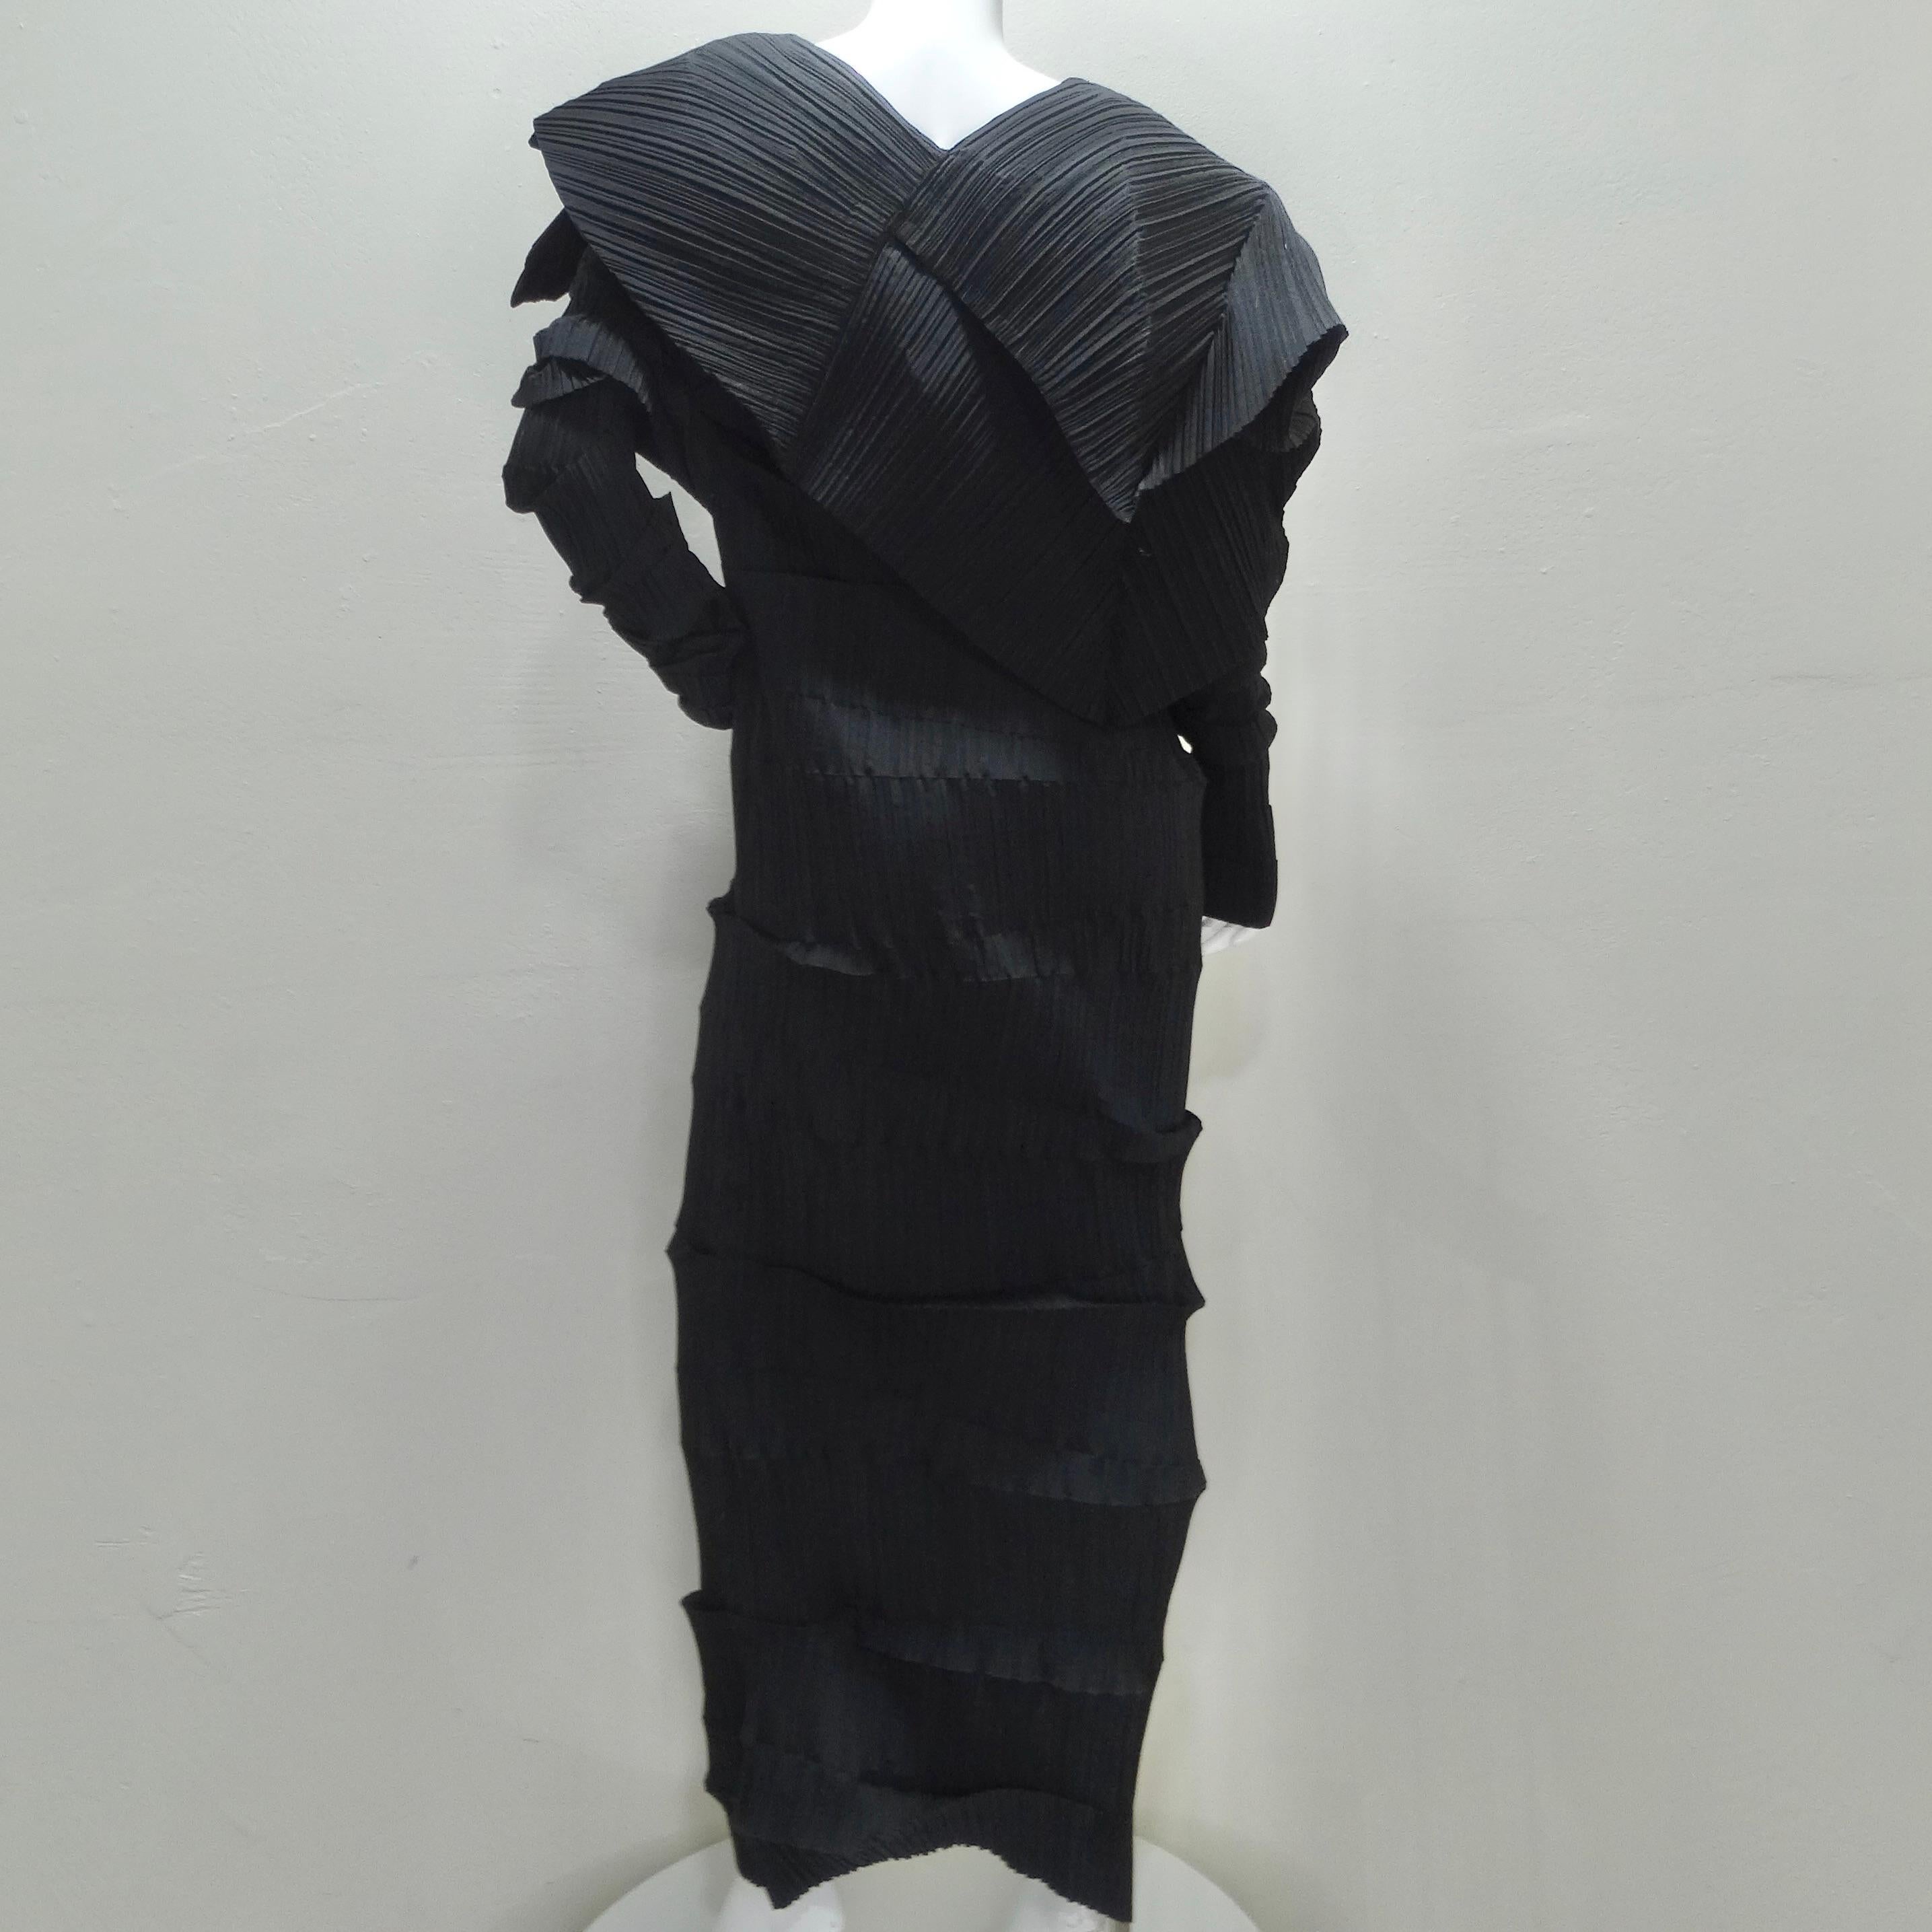 Issey Miyake 1989 Reverse Pleats Black Sculptural Museum Quality Dress For Sale 3